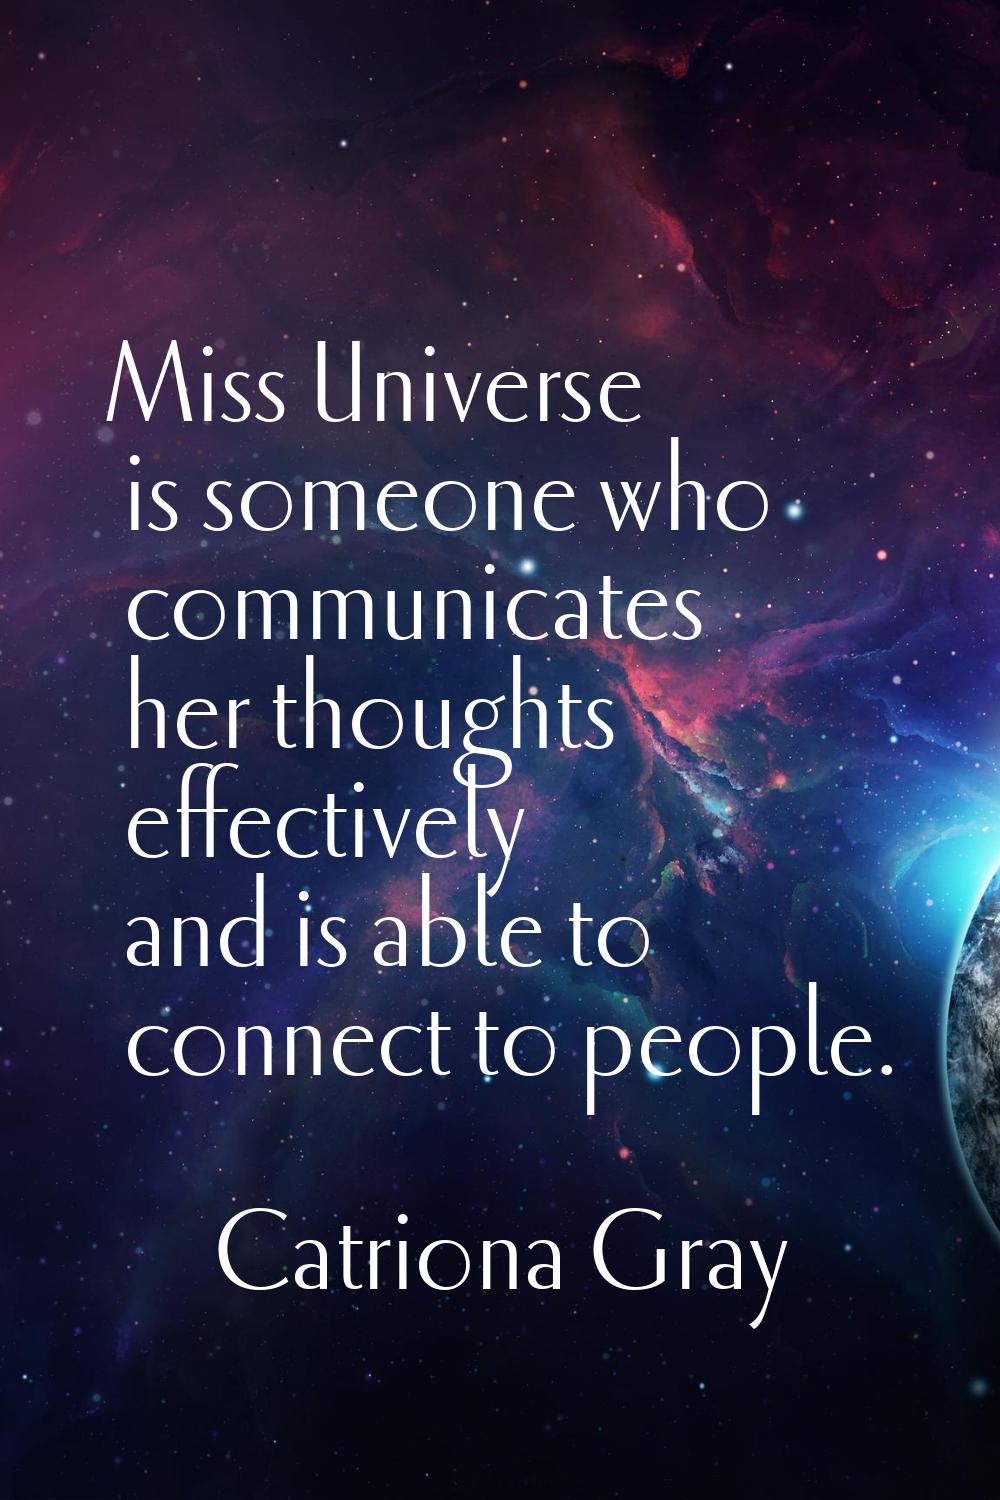 Miss Universe is someone who communicates her thoughts effectively and is able to connect to people